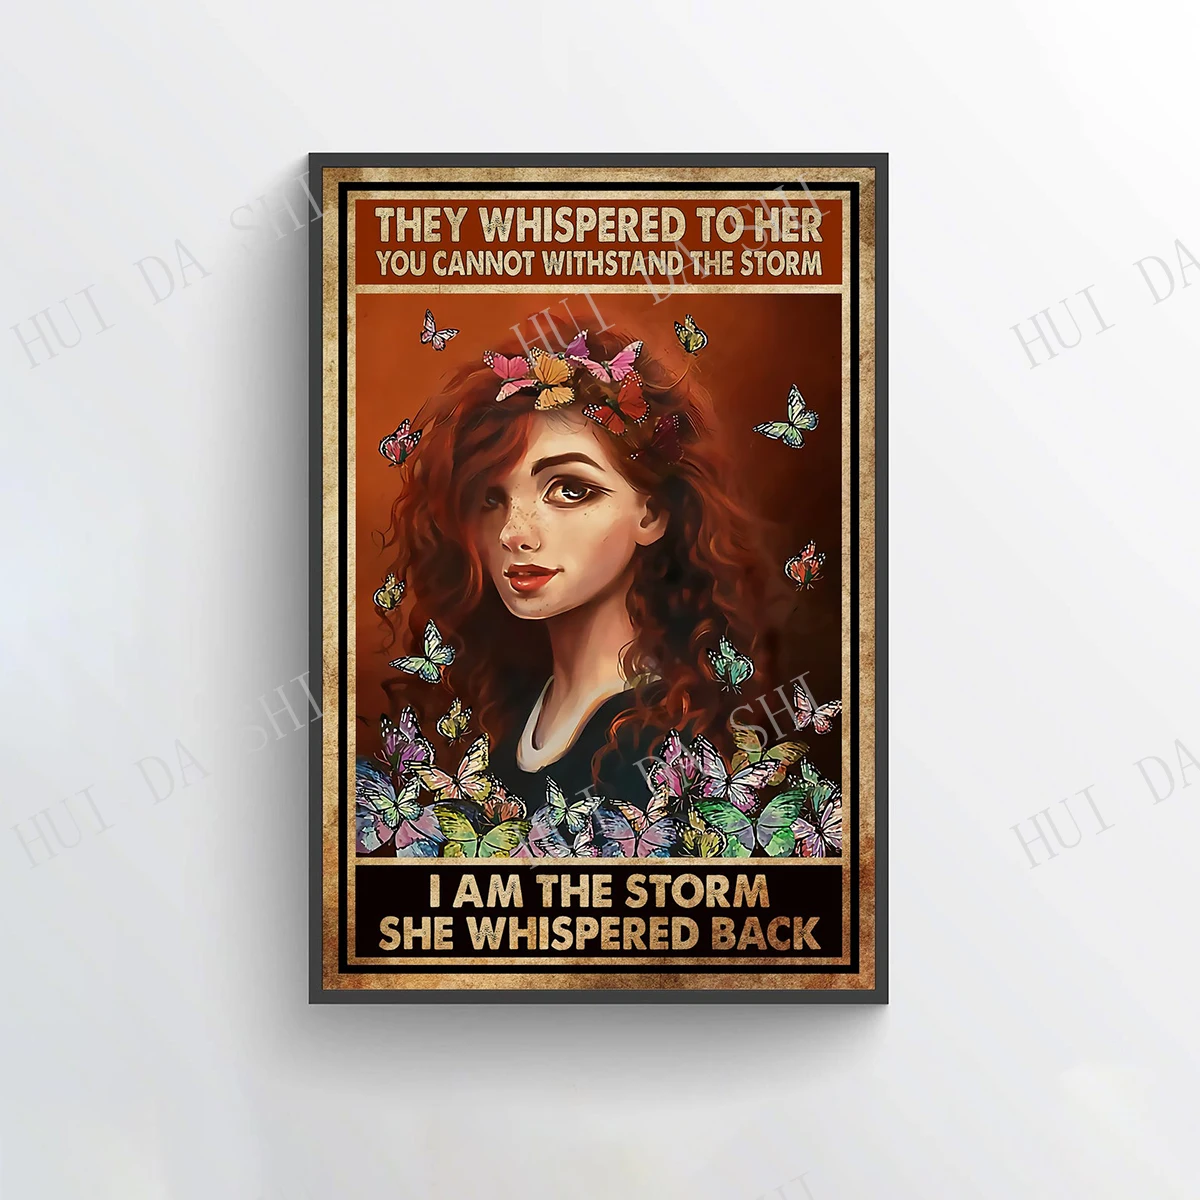 

Hippie Poster - They Whispered To Her You Cannot Withstand The Storm She Whispered Back I Am The Storm, Butterfly prints